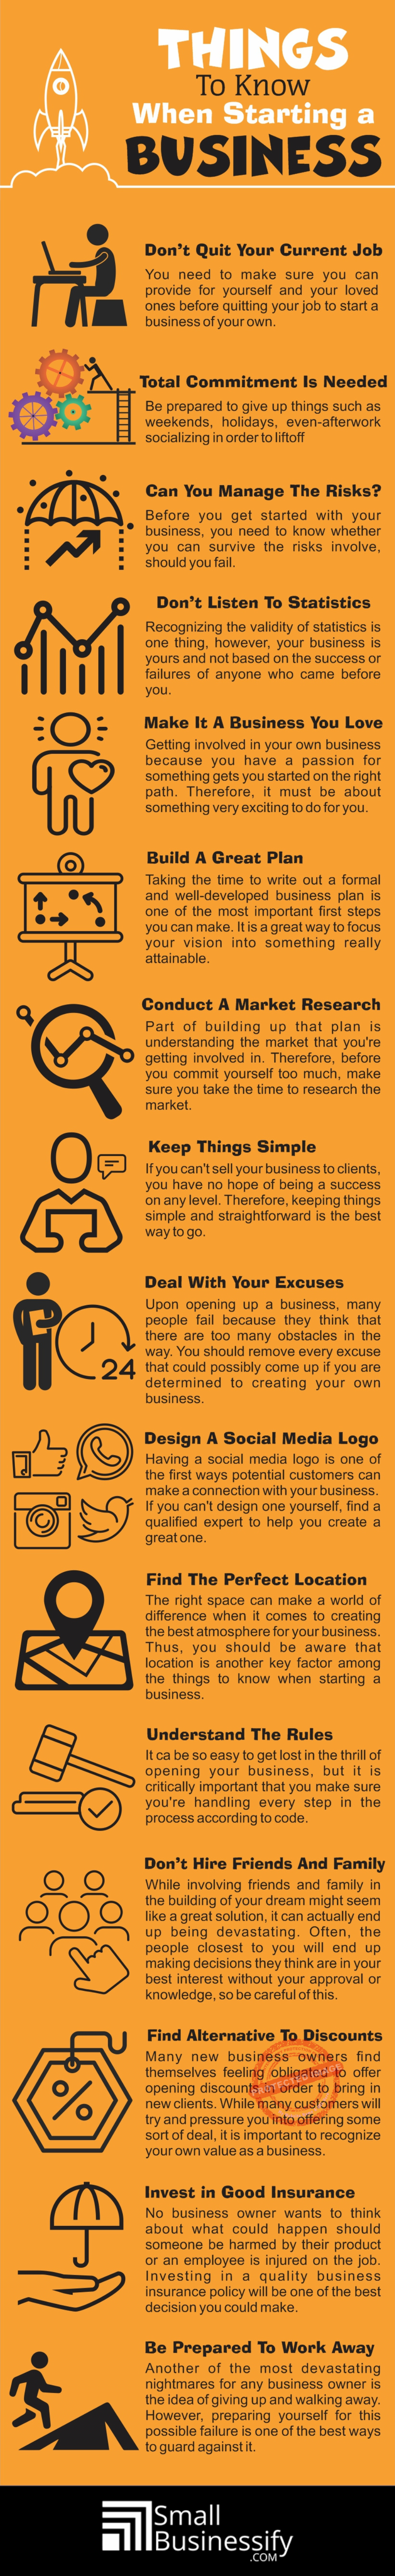 Things to know when starting a business infographic